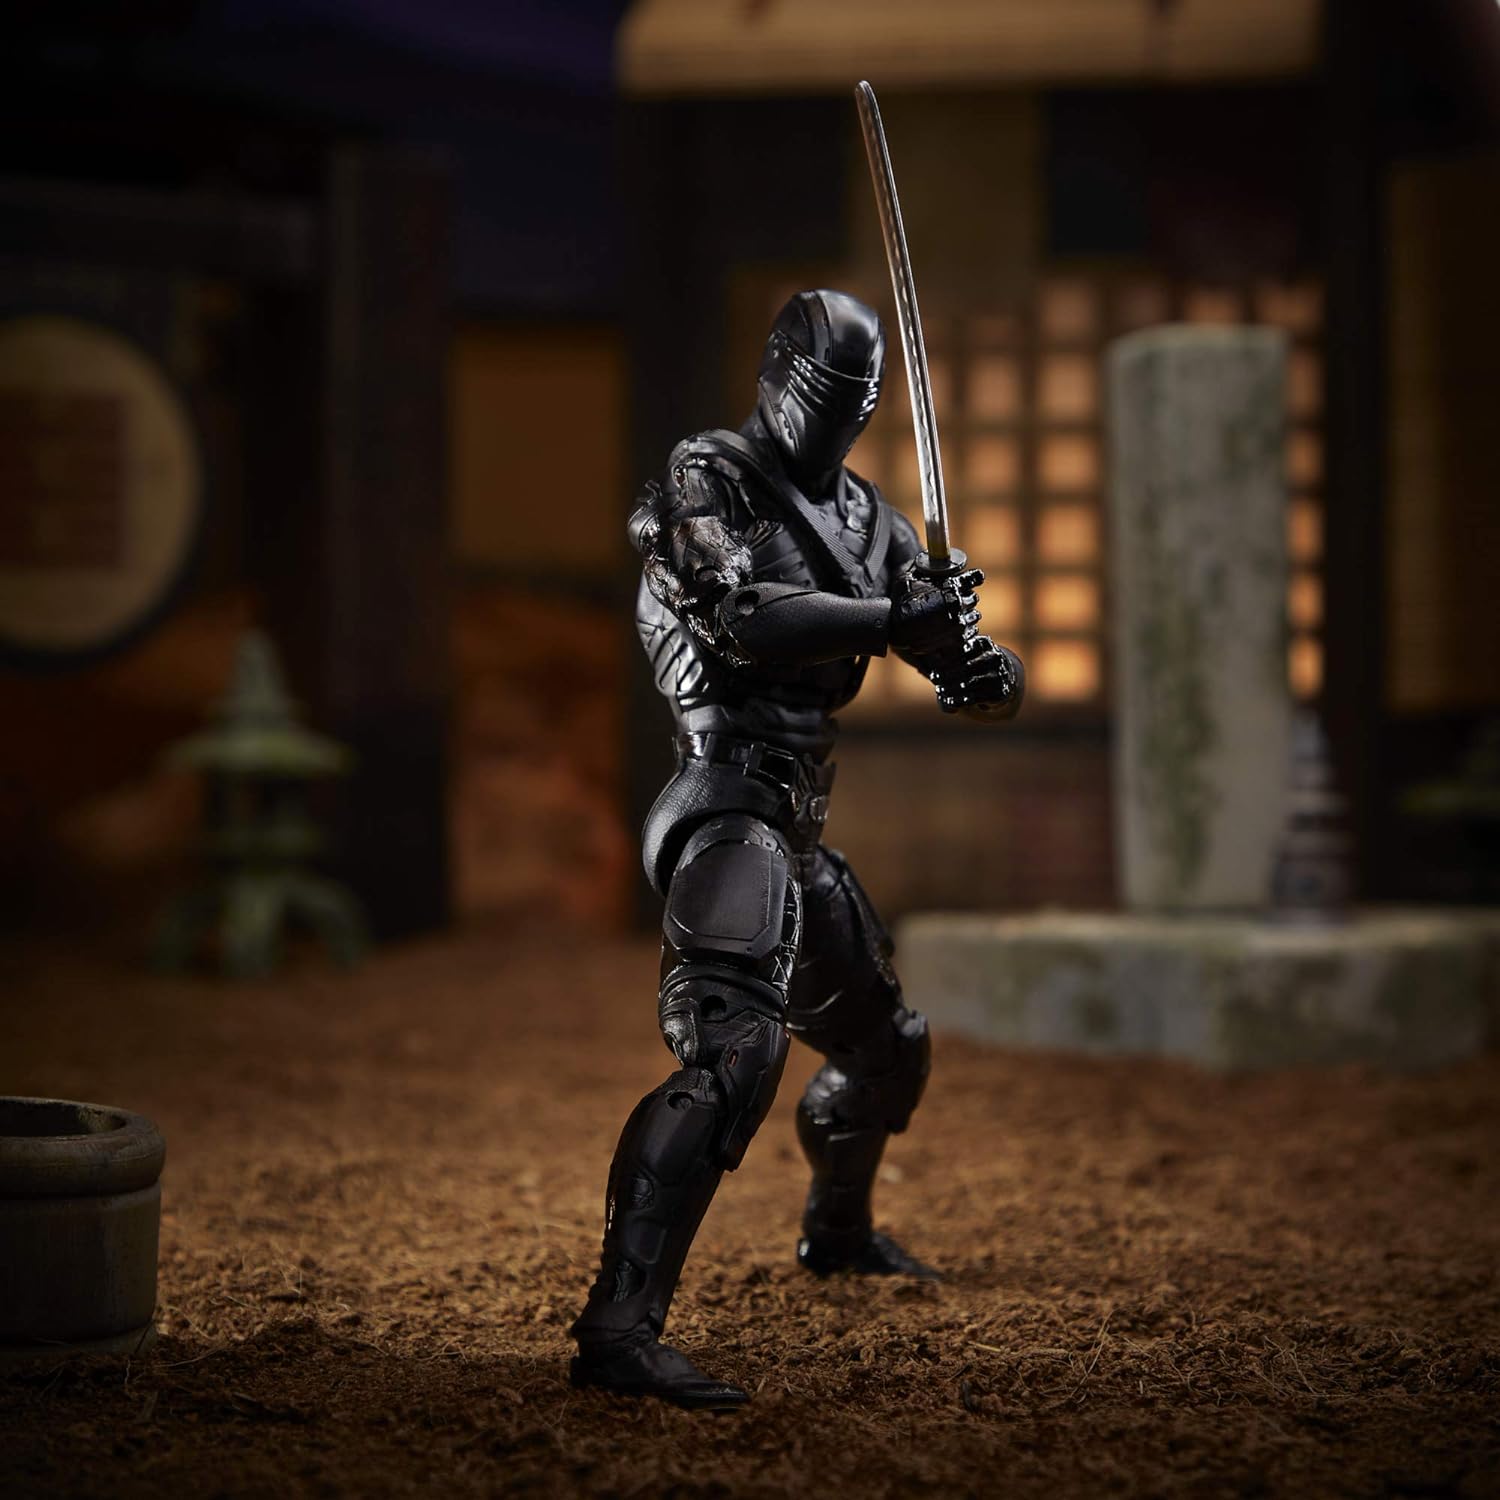 Snake Eyes Action Figure 16, Premium 6-Inch Scale Toy with Custom Package Art